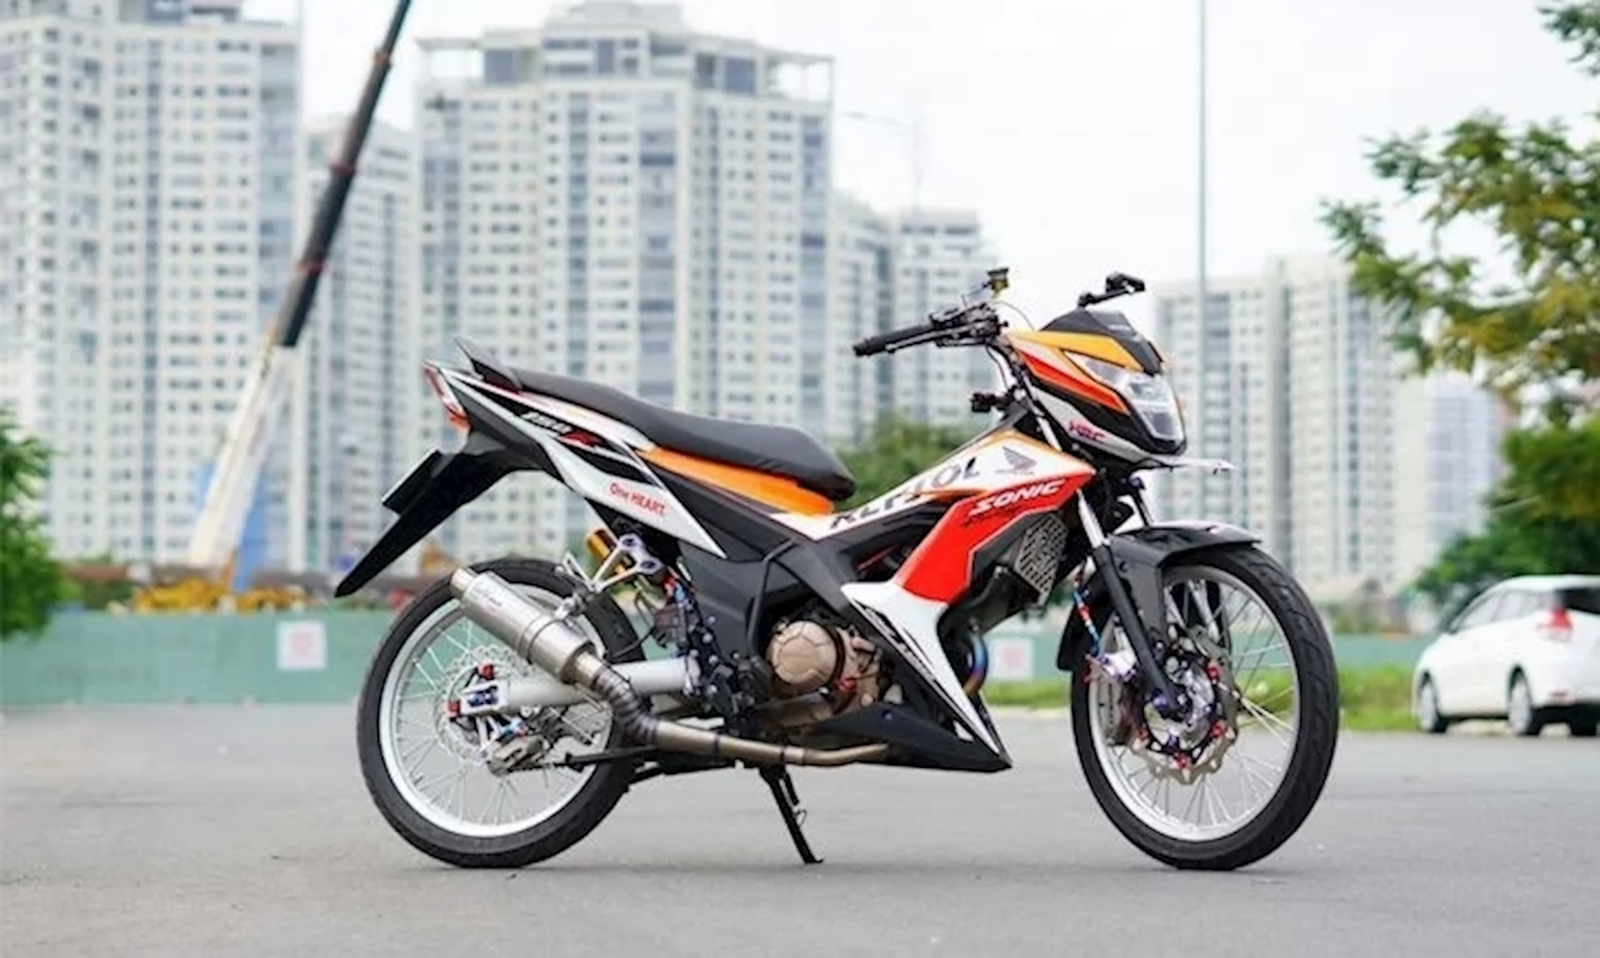 Review chi tiết xe Sonic 150cc.